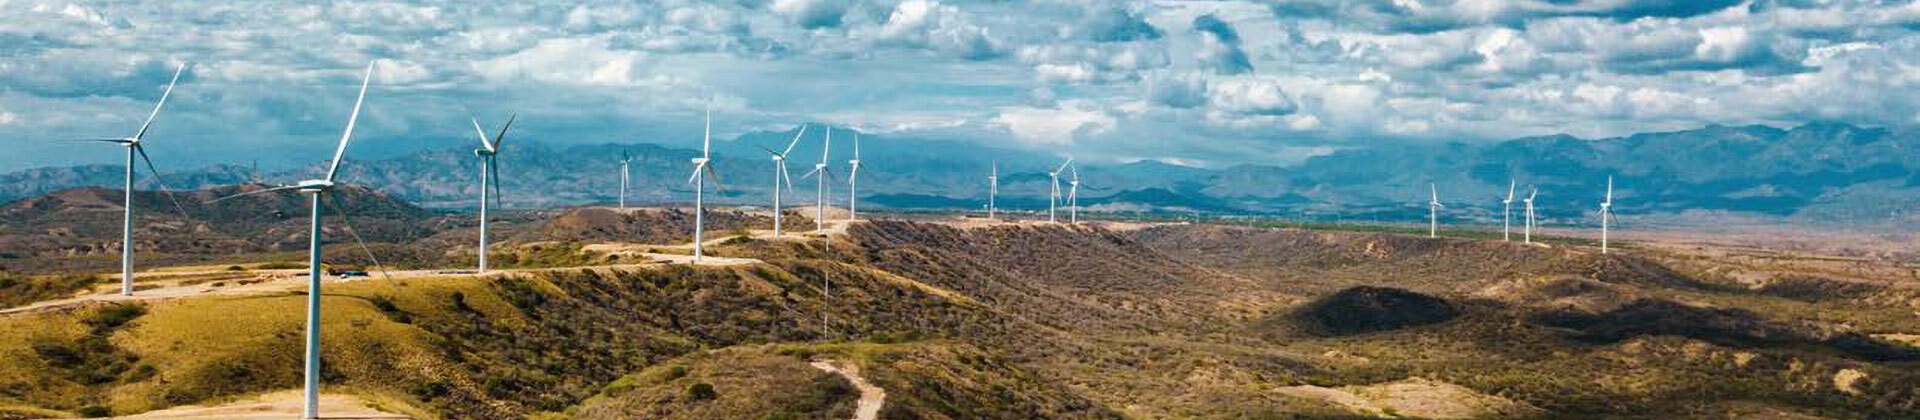 path-to-100-renewables-for-dominican-republic